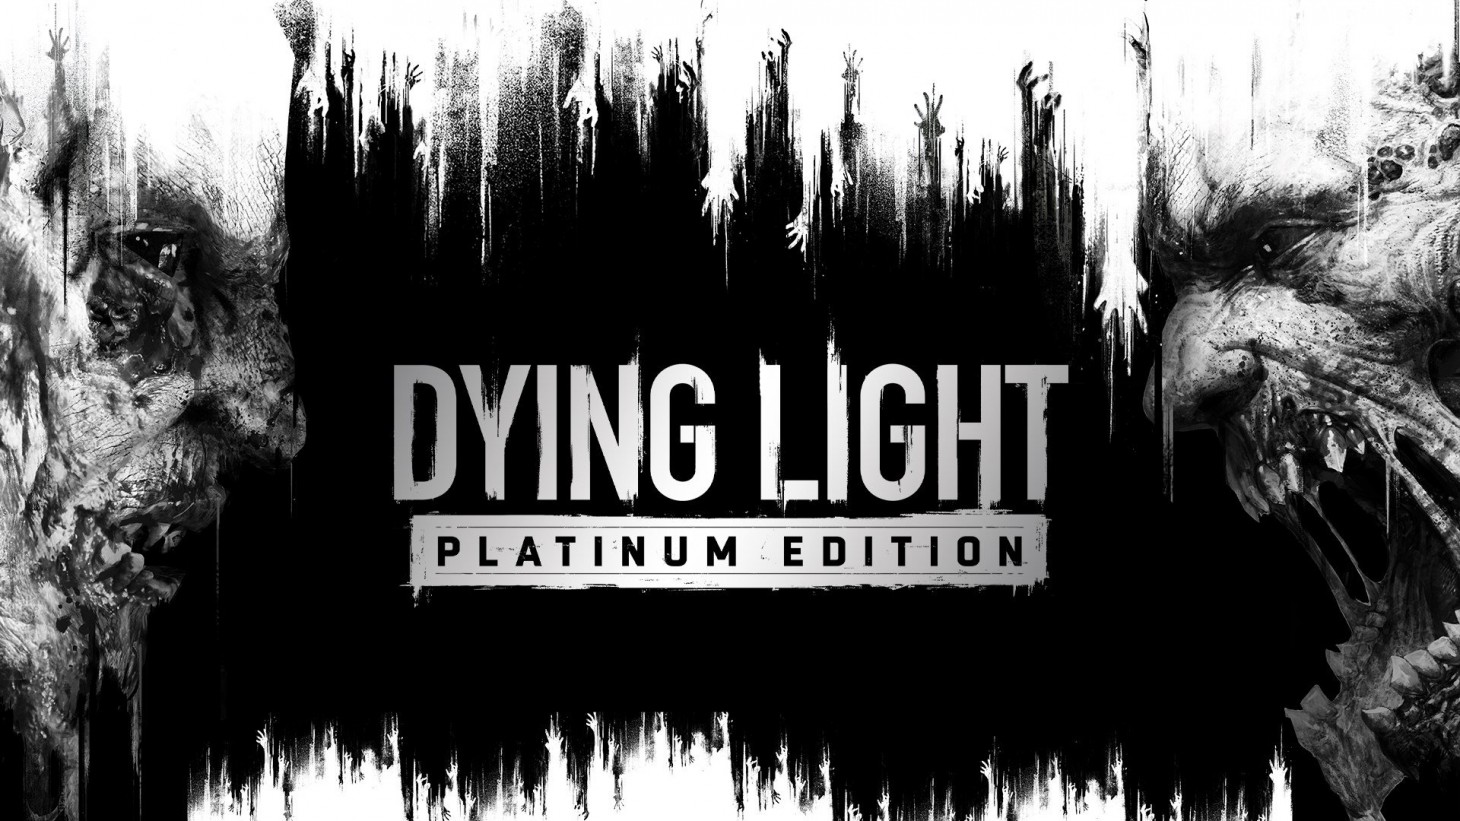 Dying Light: Platinum Edition PS5 Version Full Game Free Download